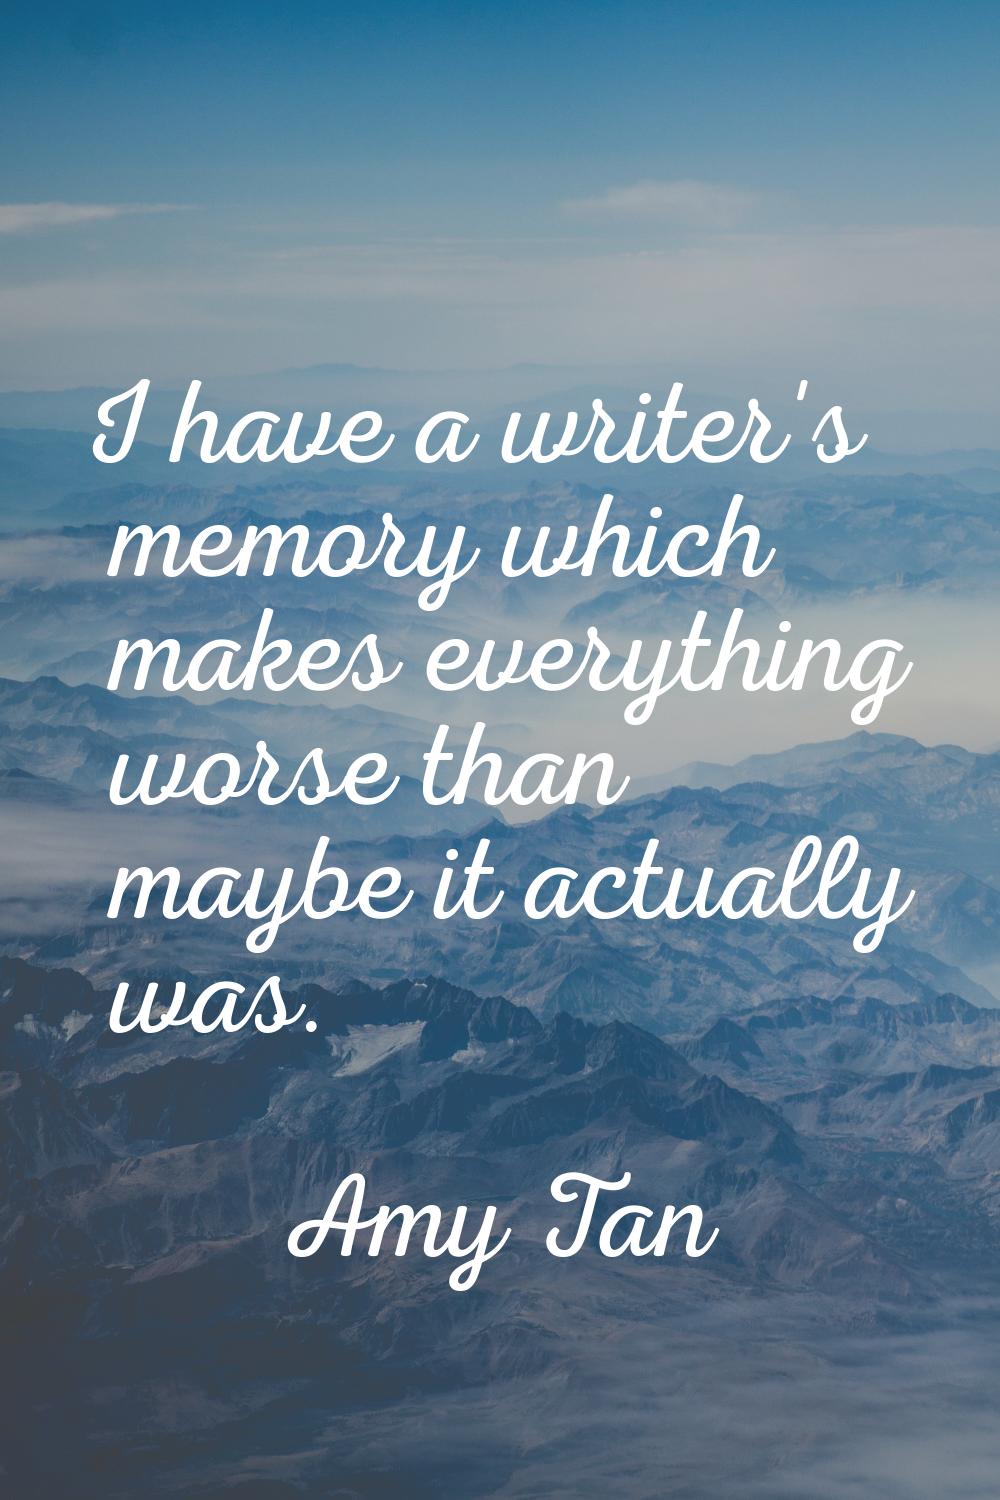 I have a writer's memory which makes everything worse than maybe it actually was.